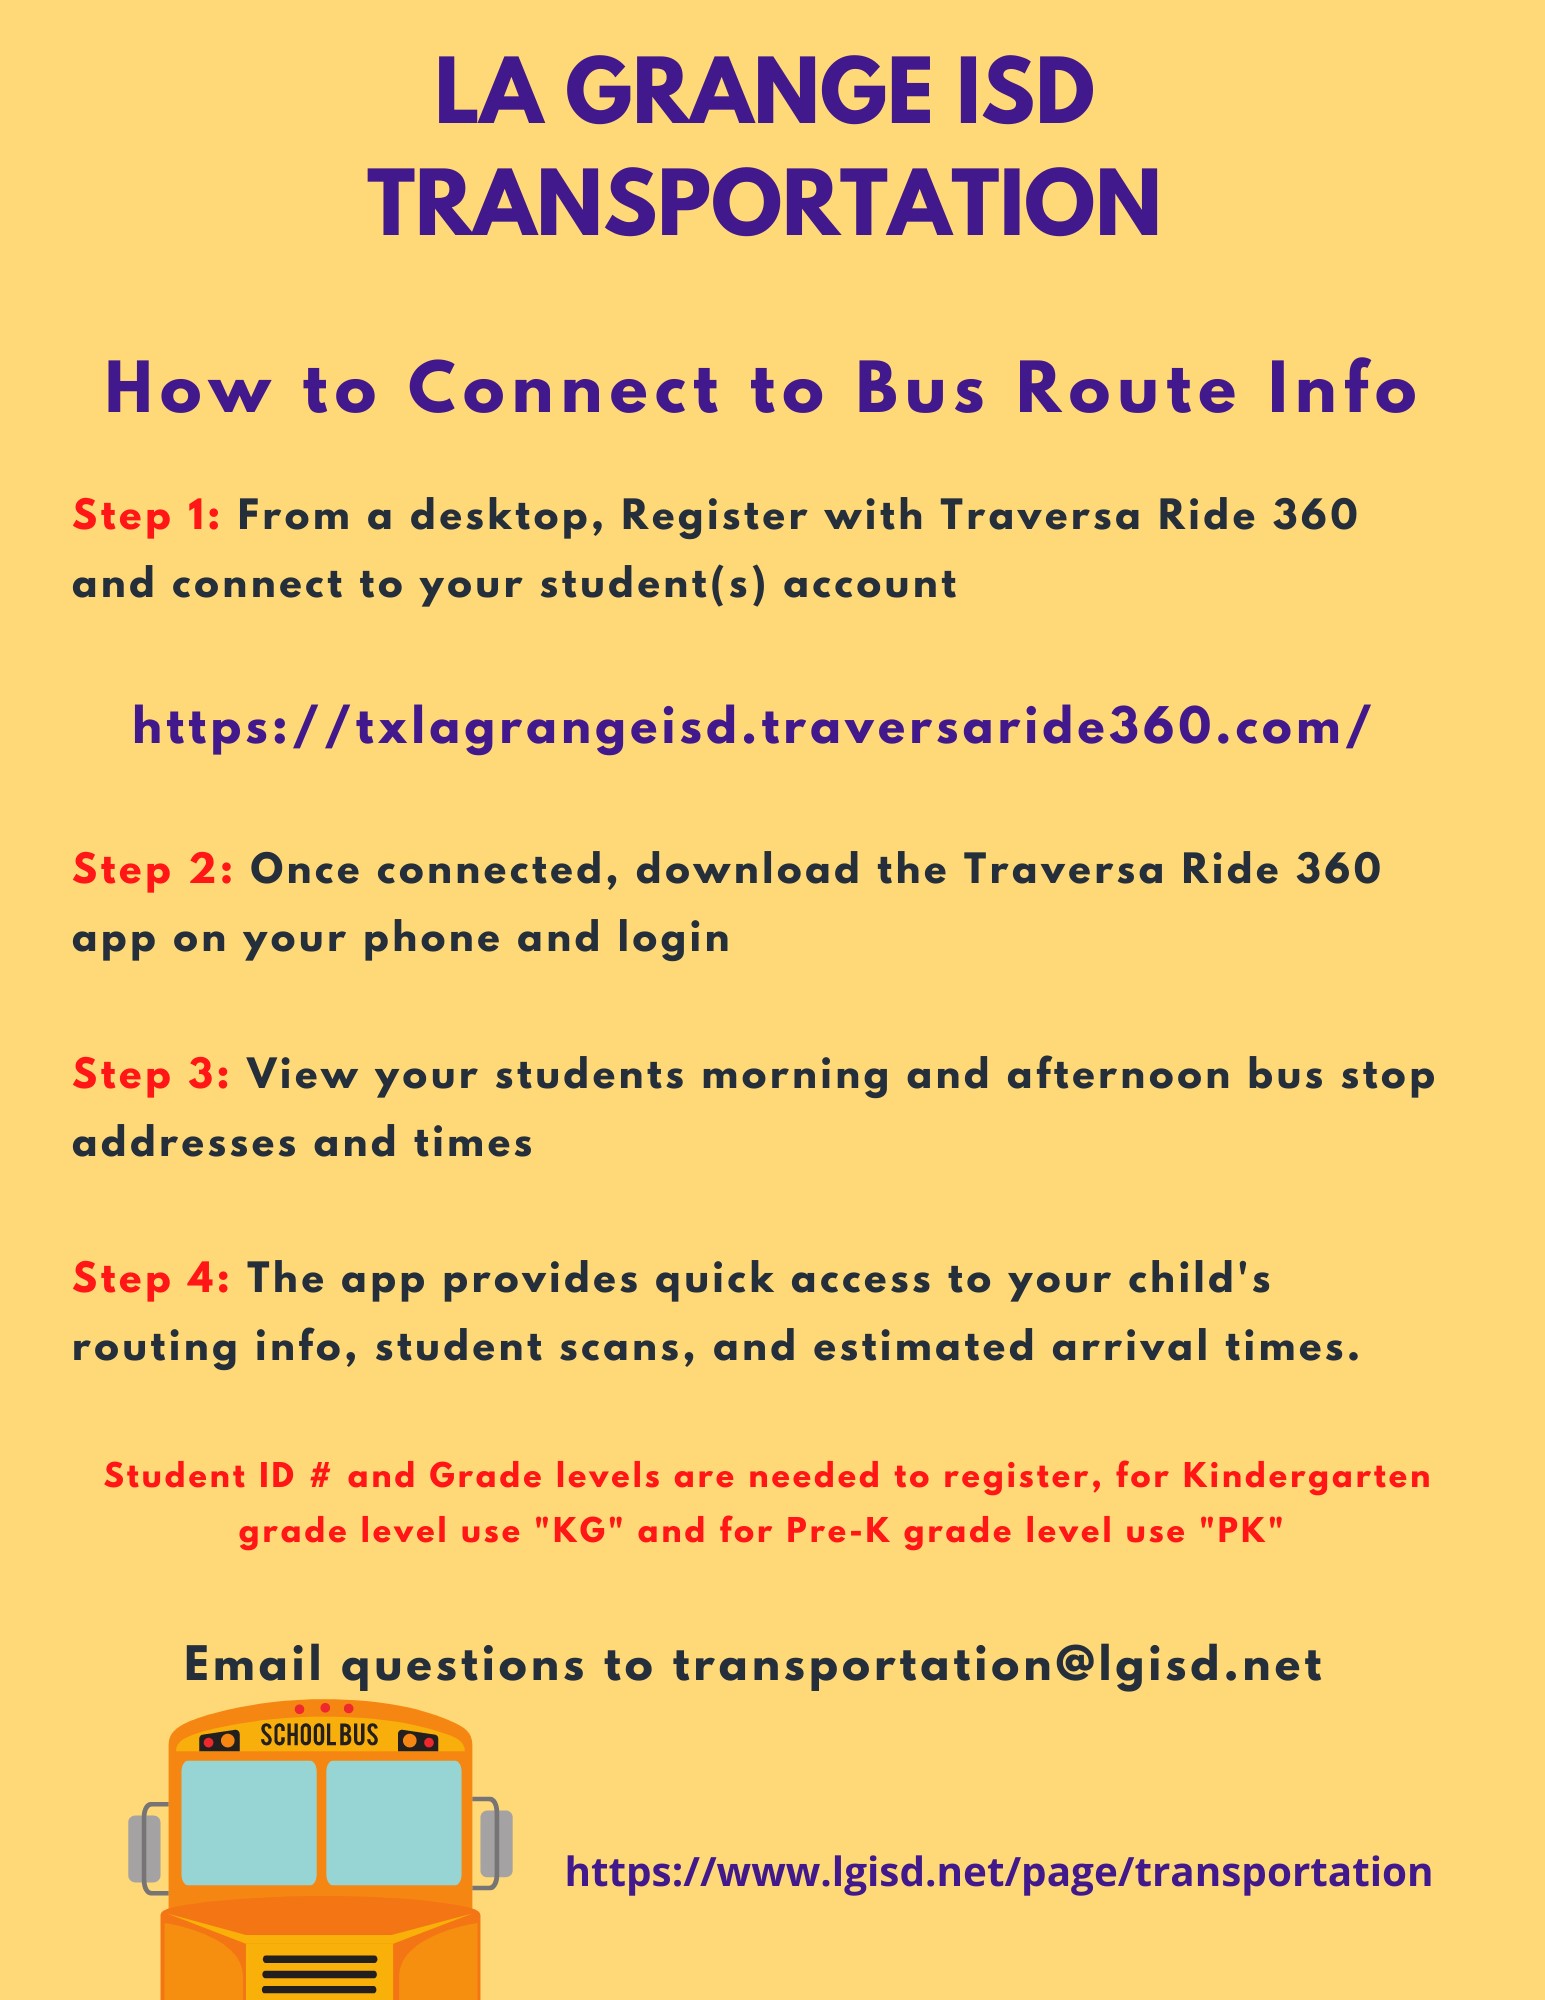 How to connect to bus routes